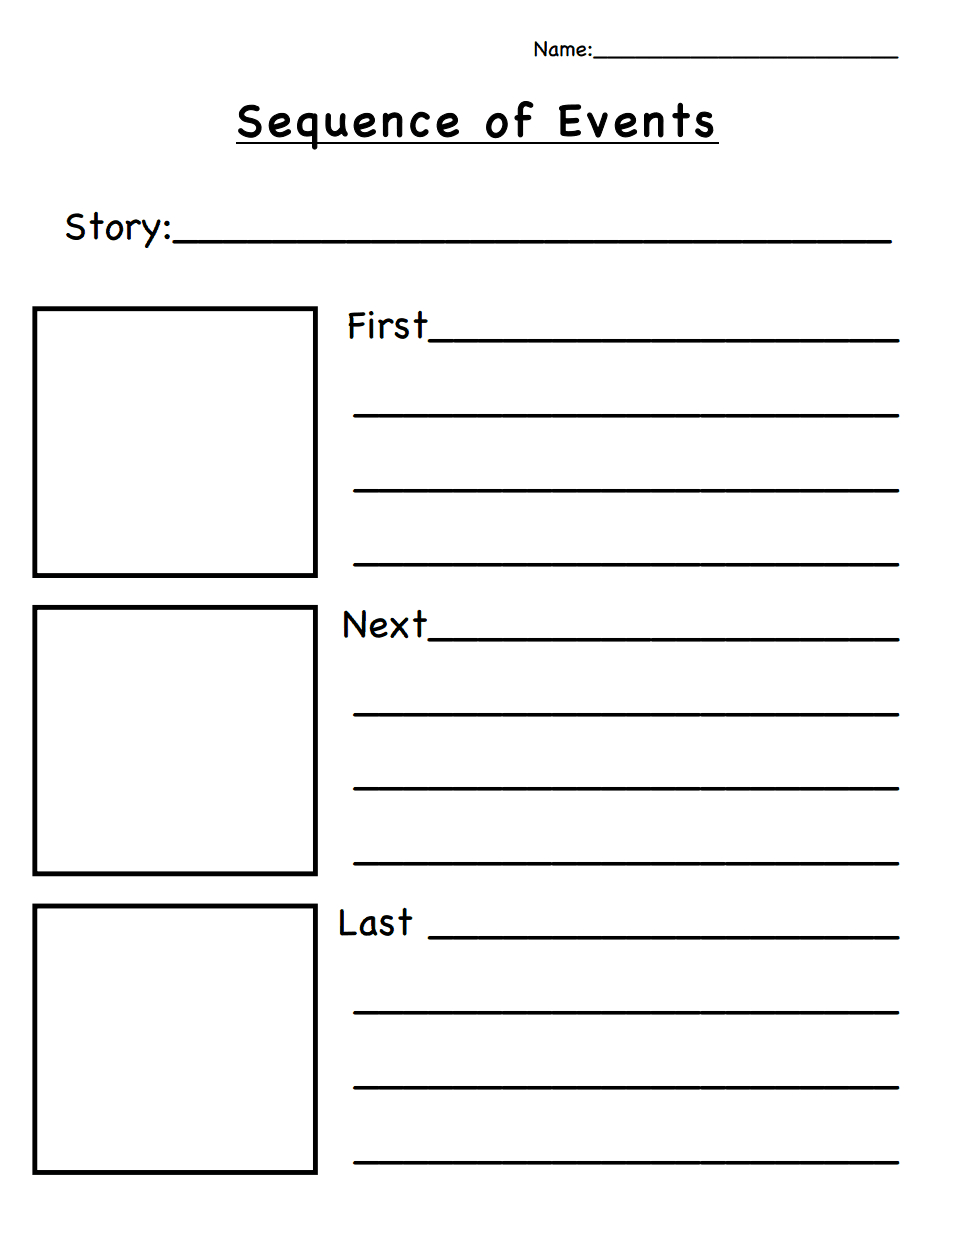 Sequence Of Events.pdf | Classroom Ideas | Sequence Of Events, Story - Free Printable Sequence Of Events Graphic Organizer